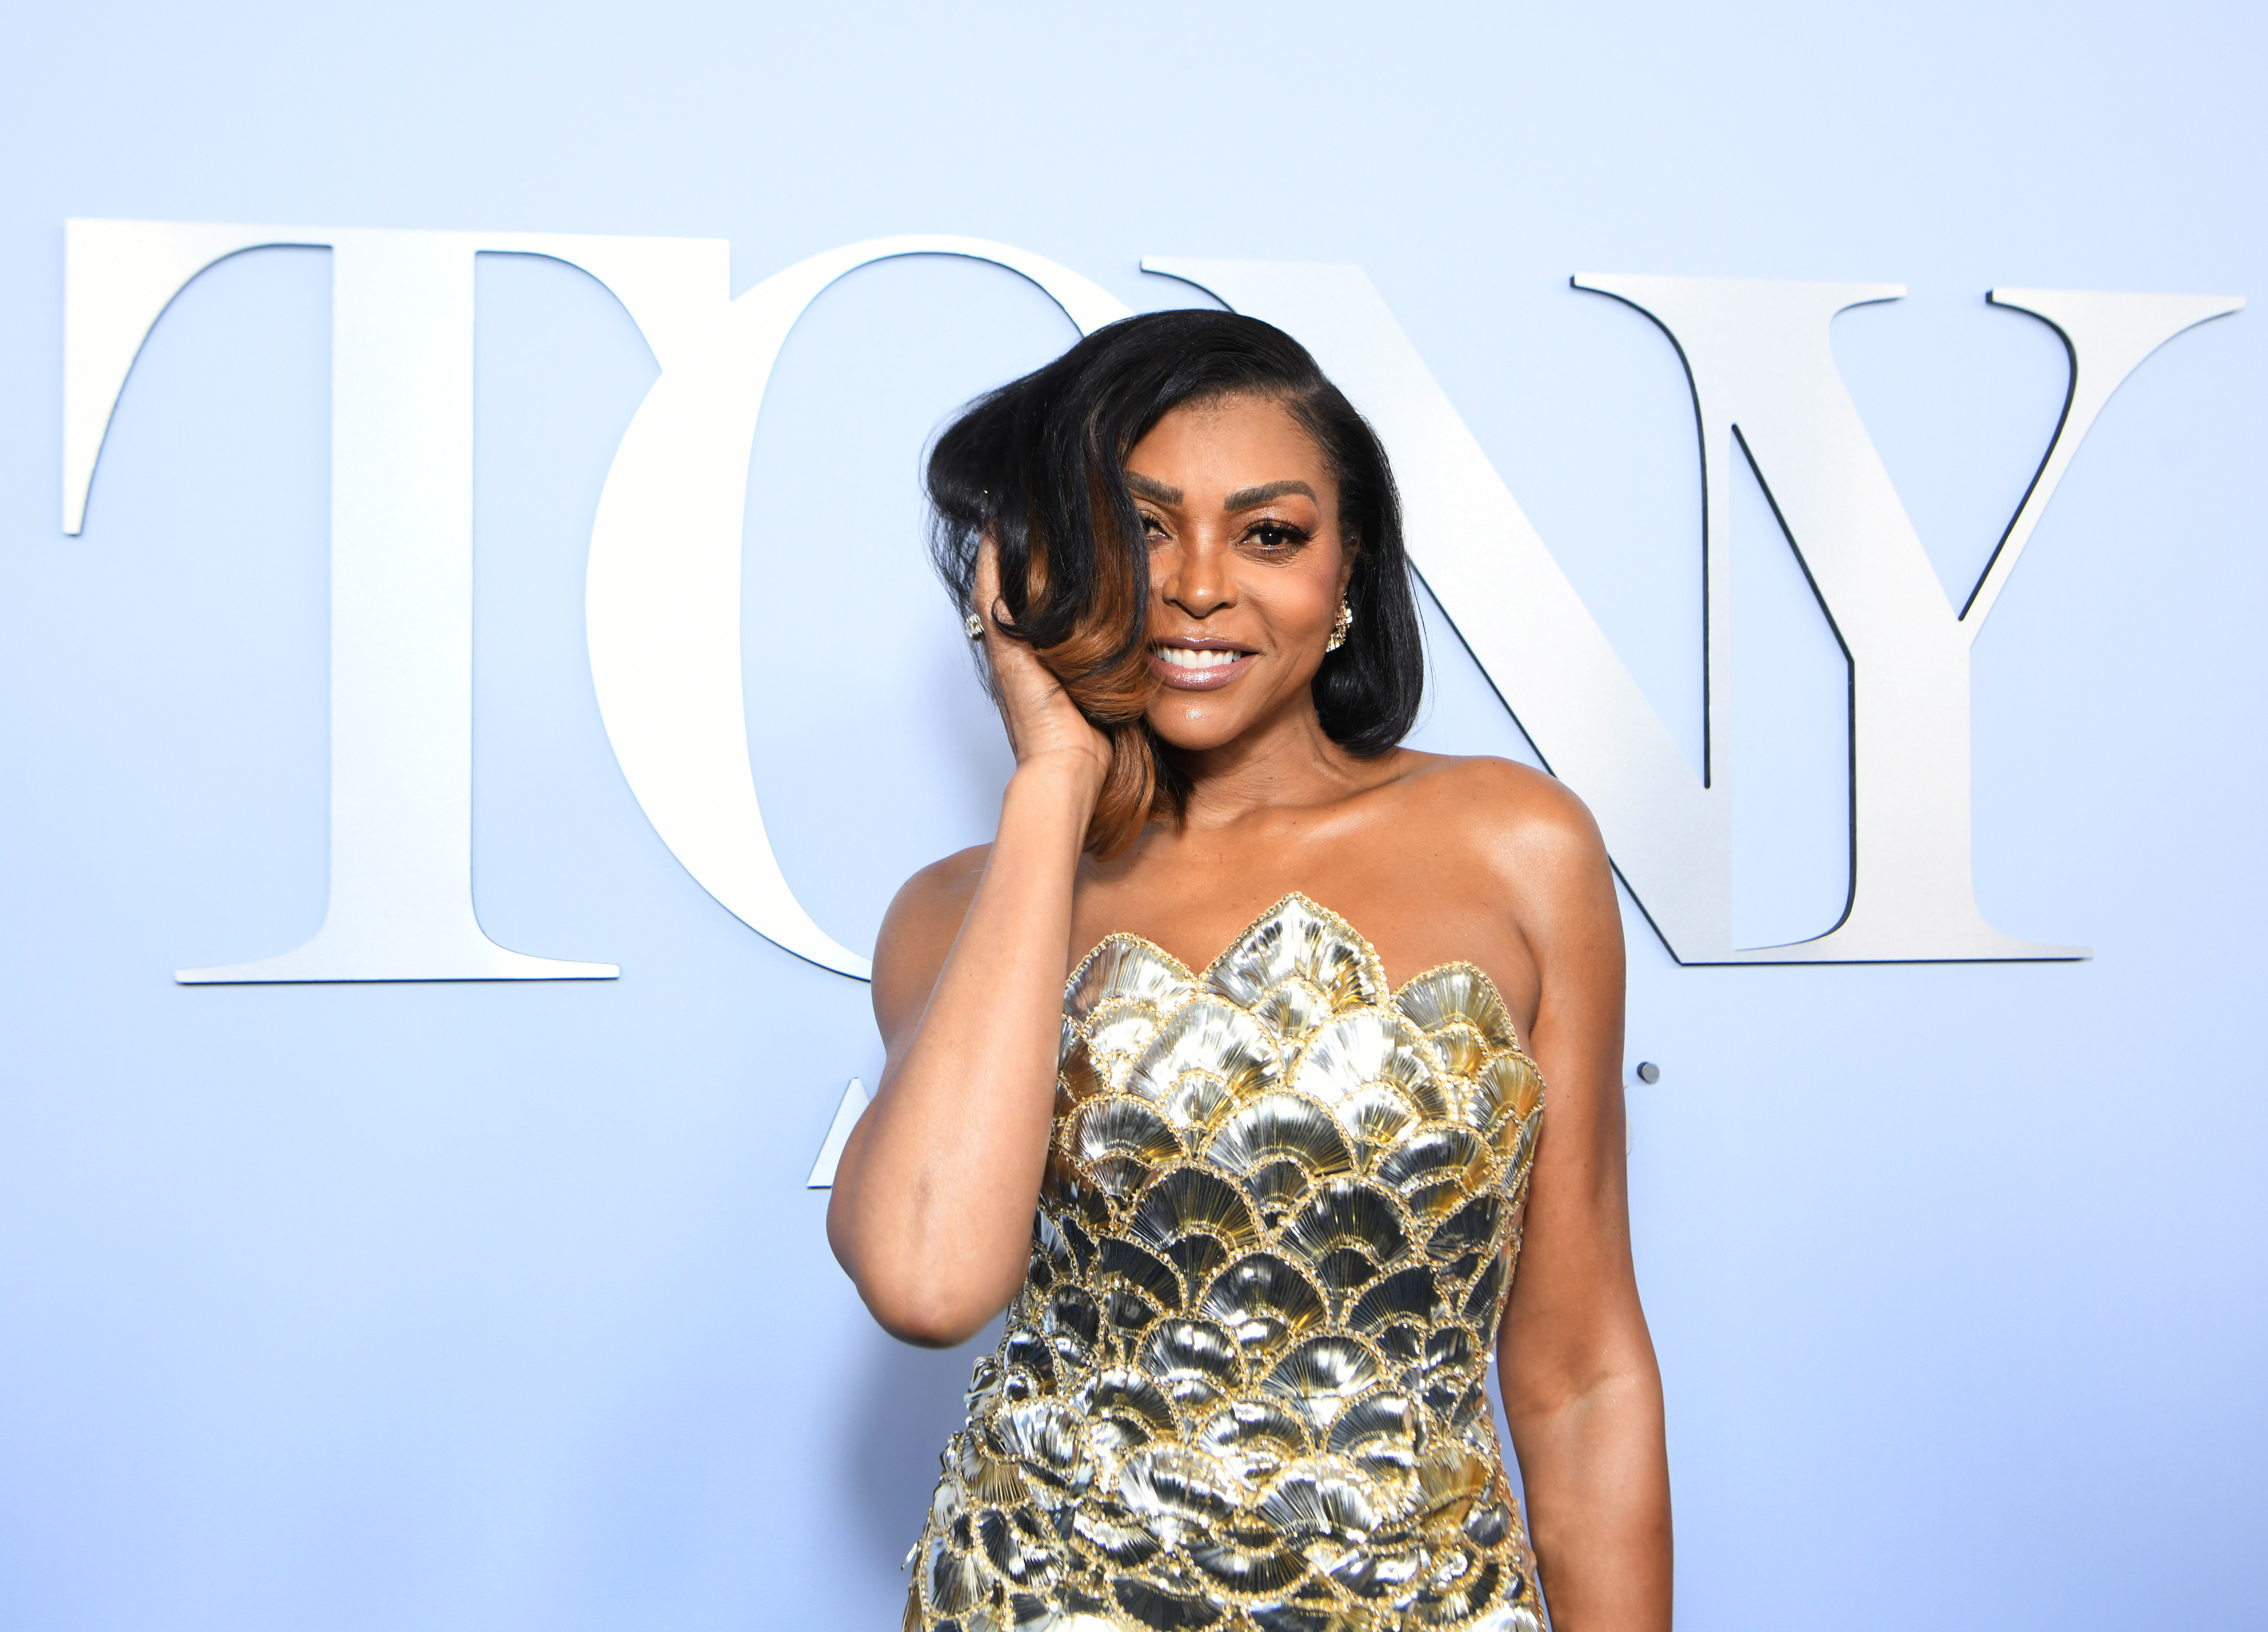 Taraji P. Henson poses in front of &quot;TONY&quot; sign in a strapless, sequined gown with a scallop pattern. She smiles with one hand touching her hair